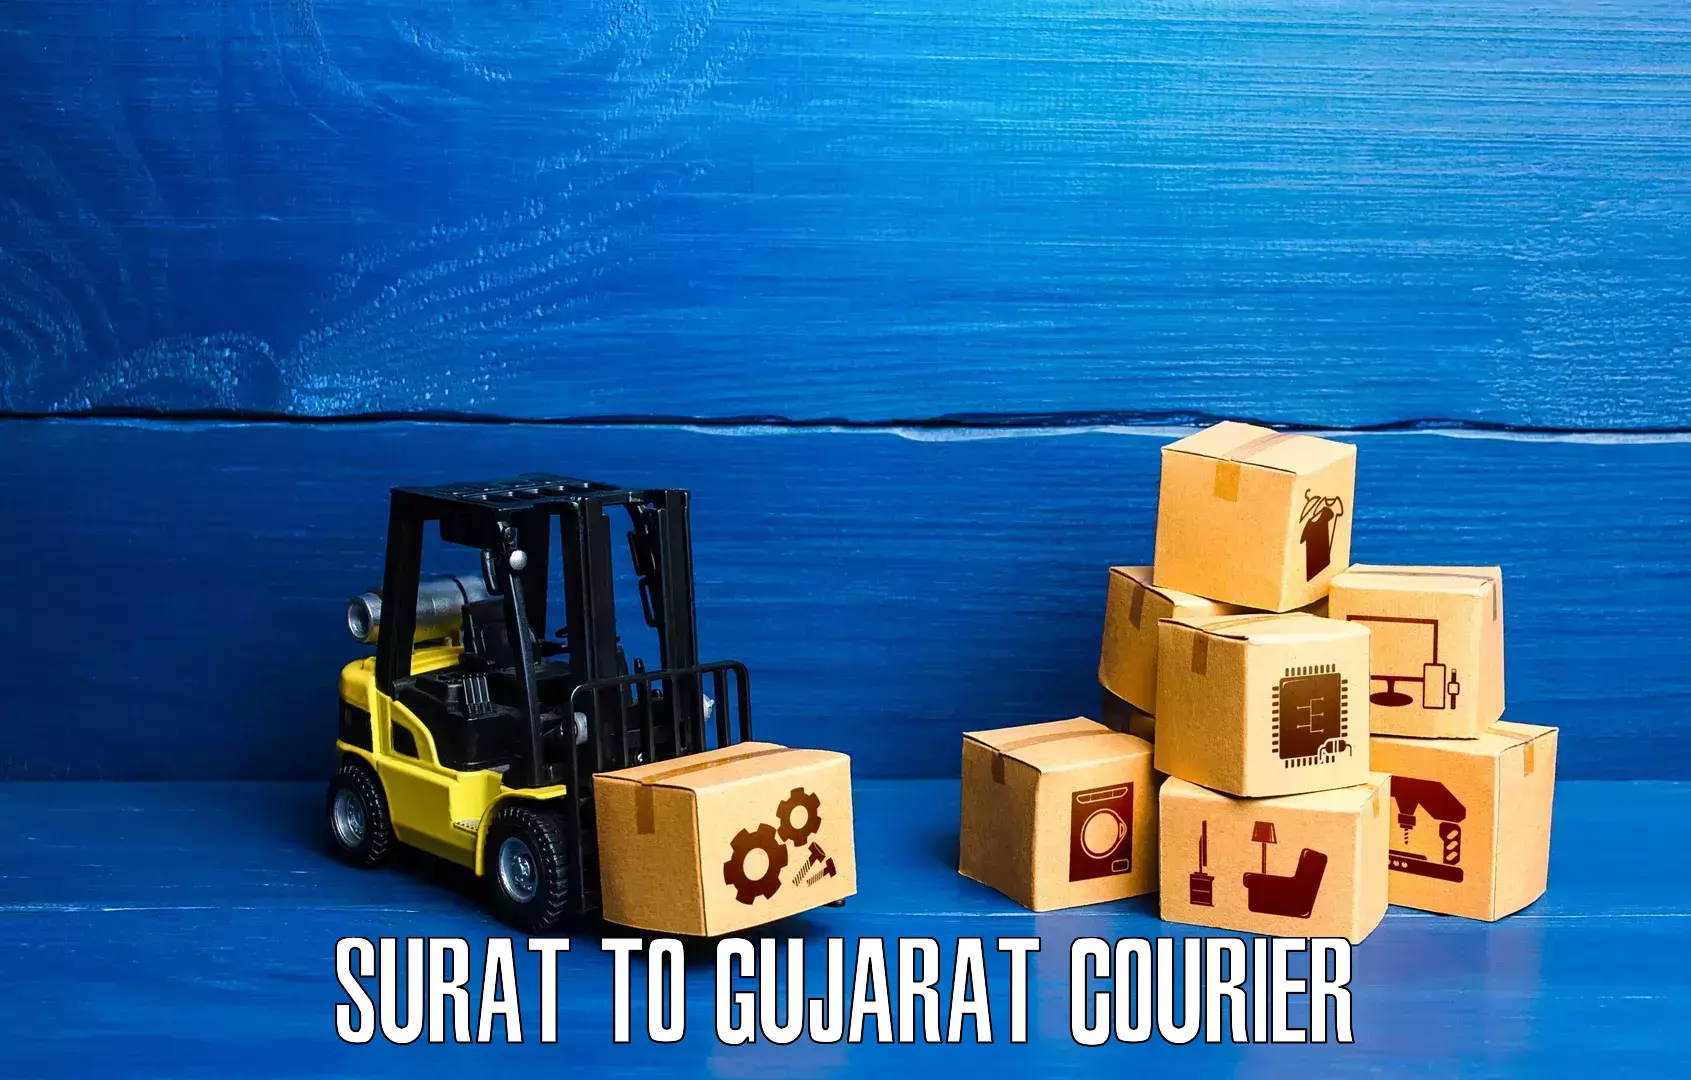 Package delivery network Surat to Patan Gujarat